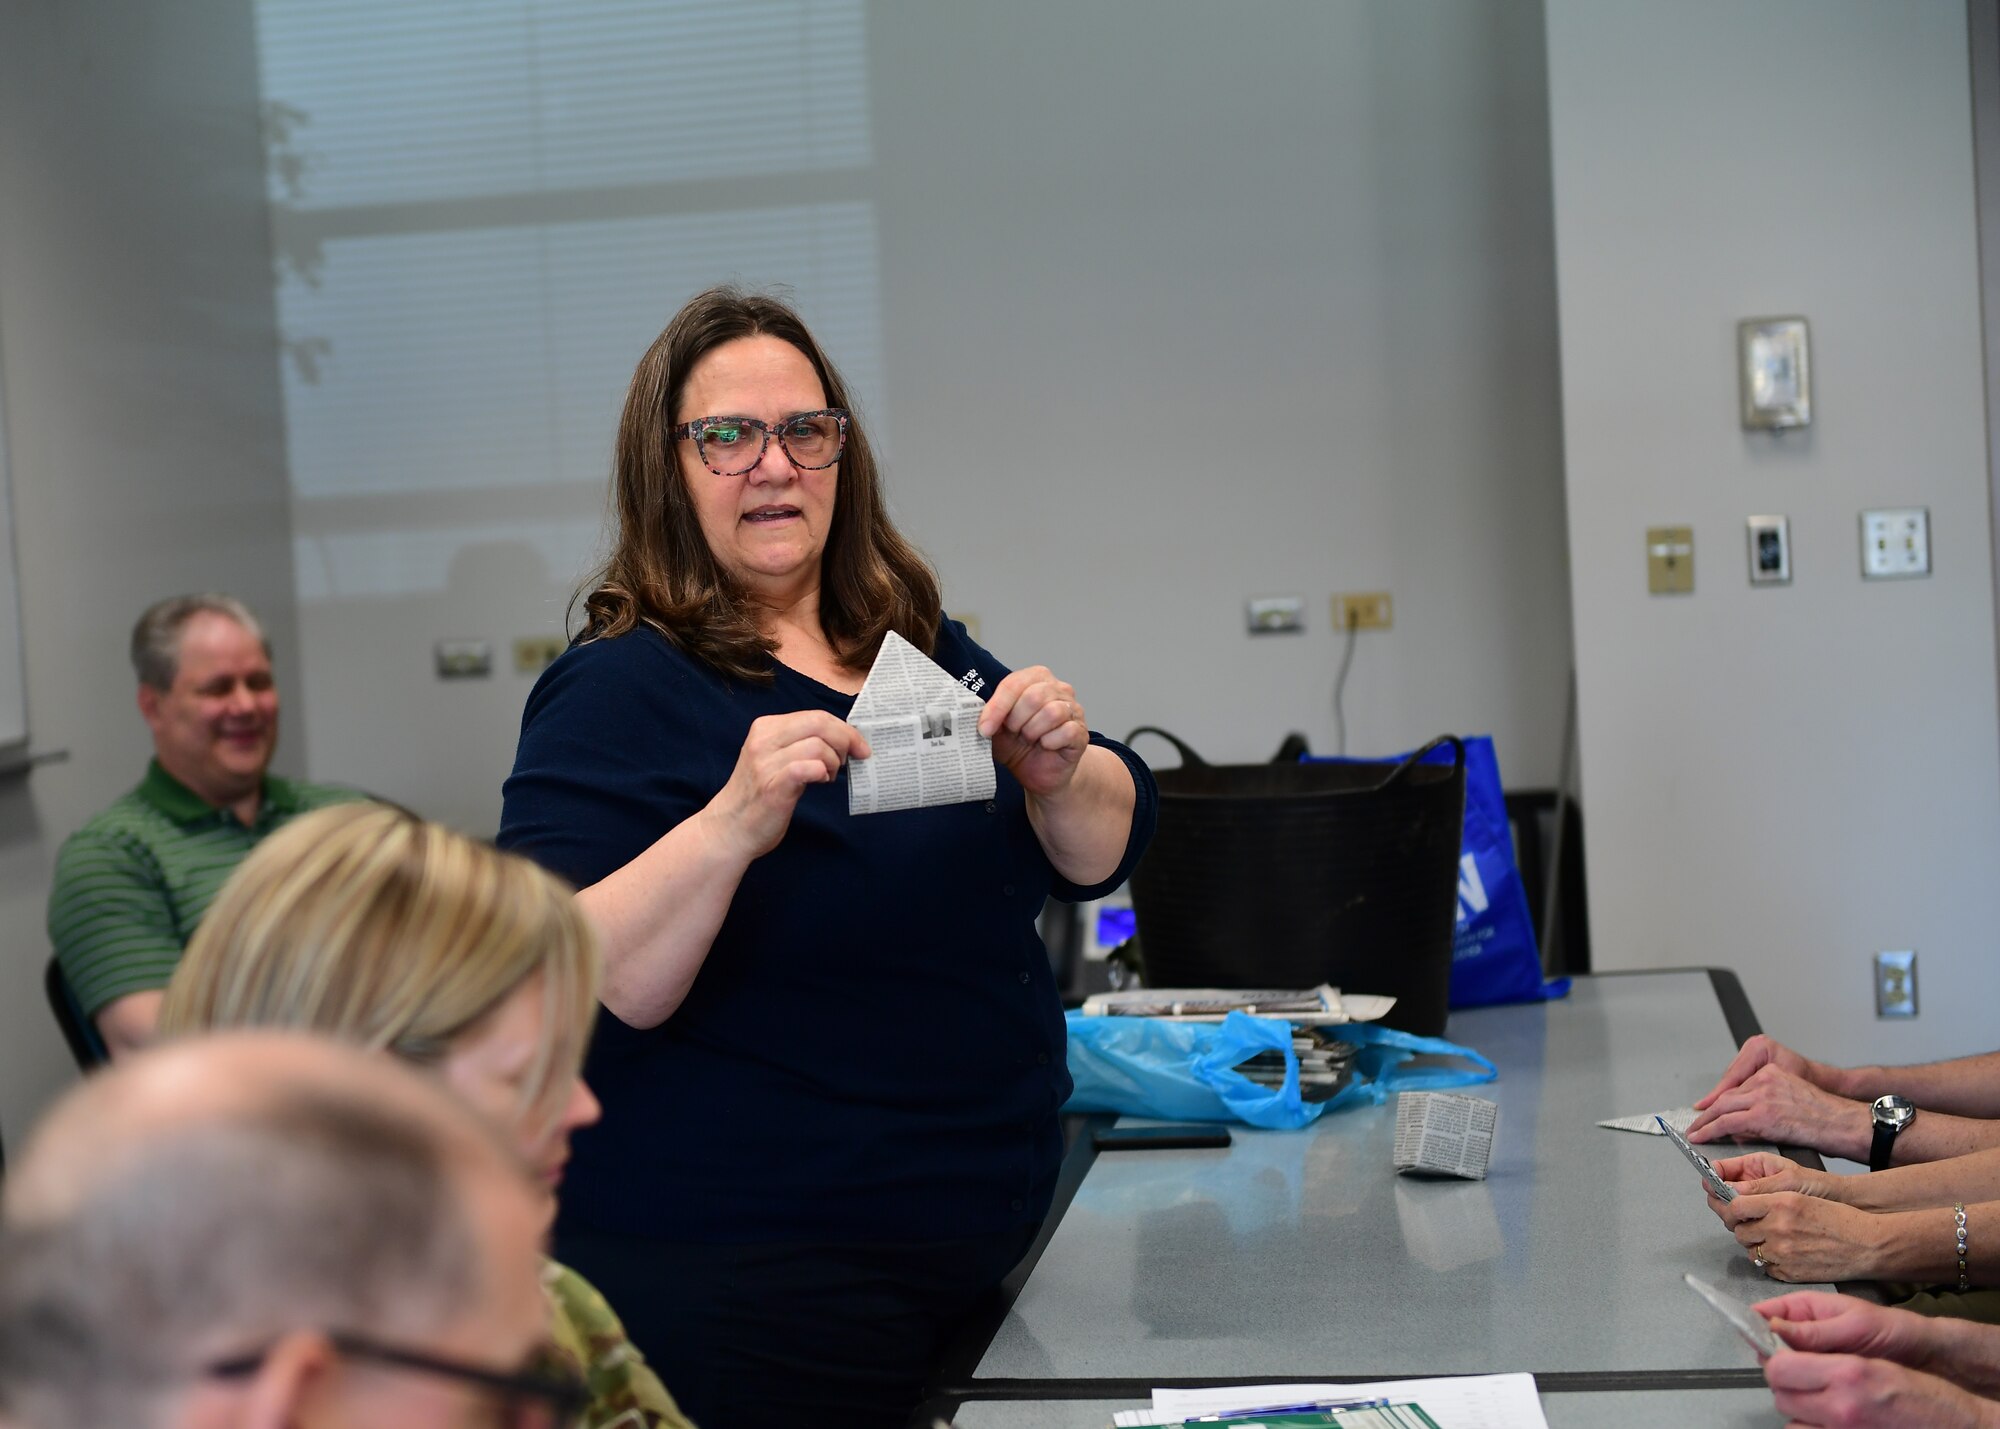 Laura Delach, Penn State Extension Office master gardener, demonstrates how the folds should look at the Pittsburgh International Airport Air Reserve Station, Pennsylvania, May 2, 2019. The newspaper’s are decomposable, which allows the plants to be placed in a new pot once the plant has matured. (U.S. Air Force Photo by Senior Airman Grace Thomson)